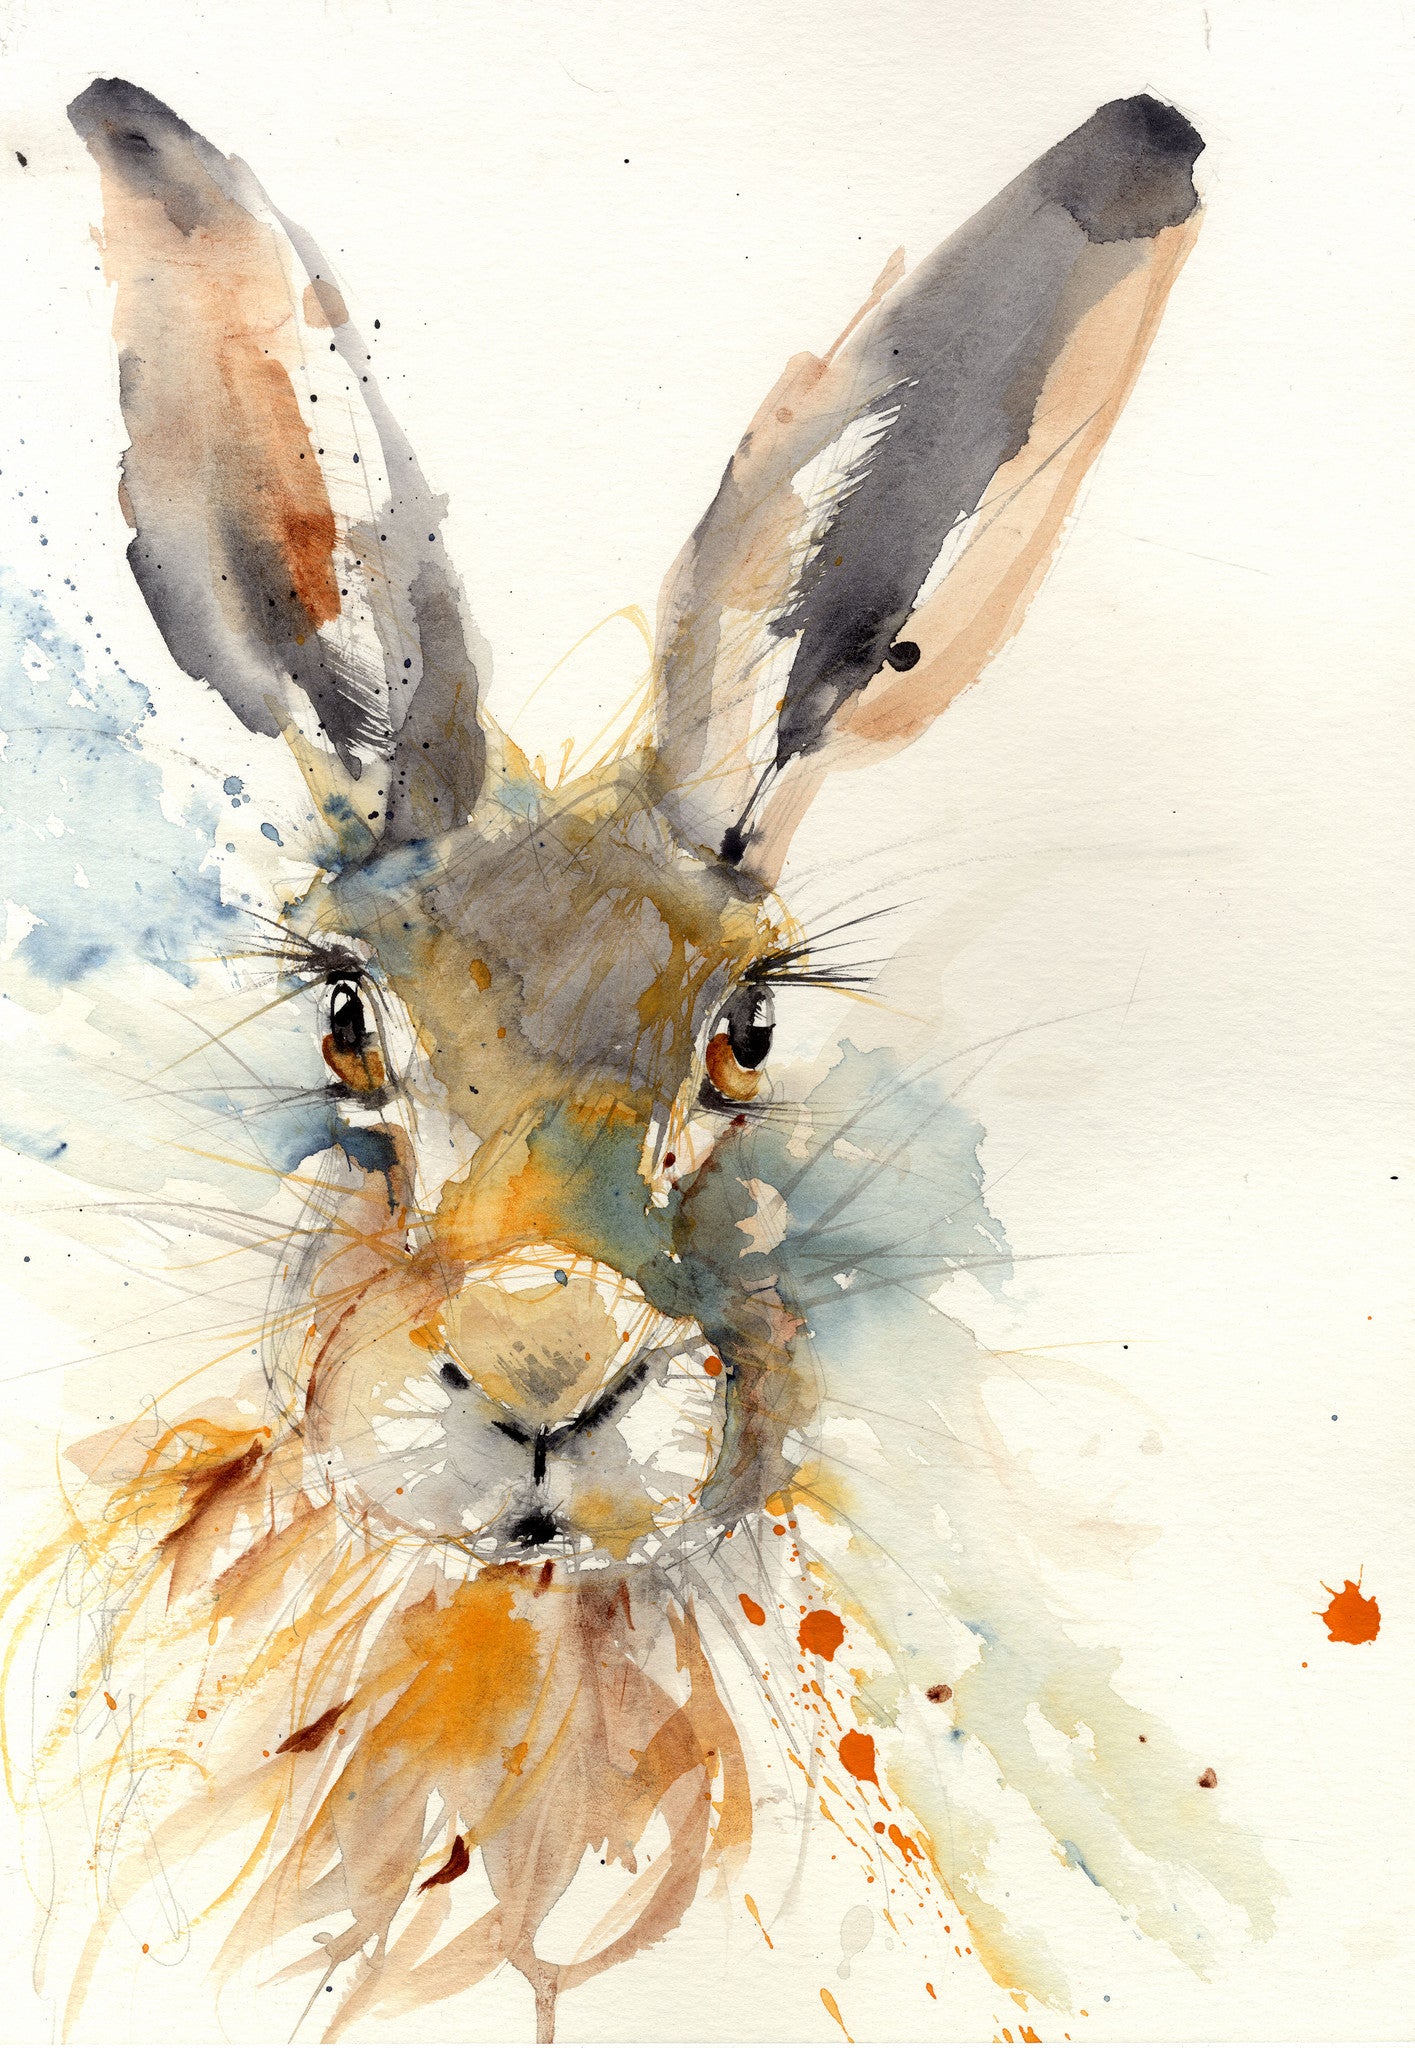 limited edition hare print - Jen Buckley Art limited edition animal art prints